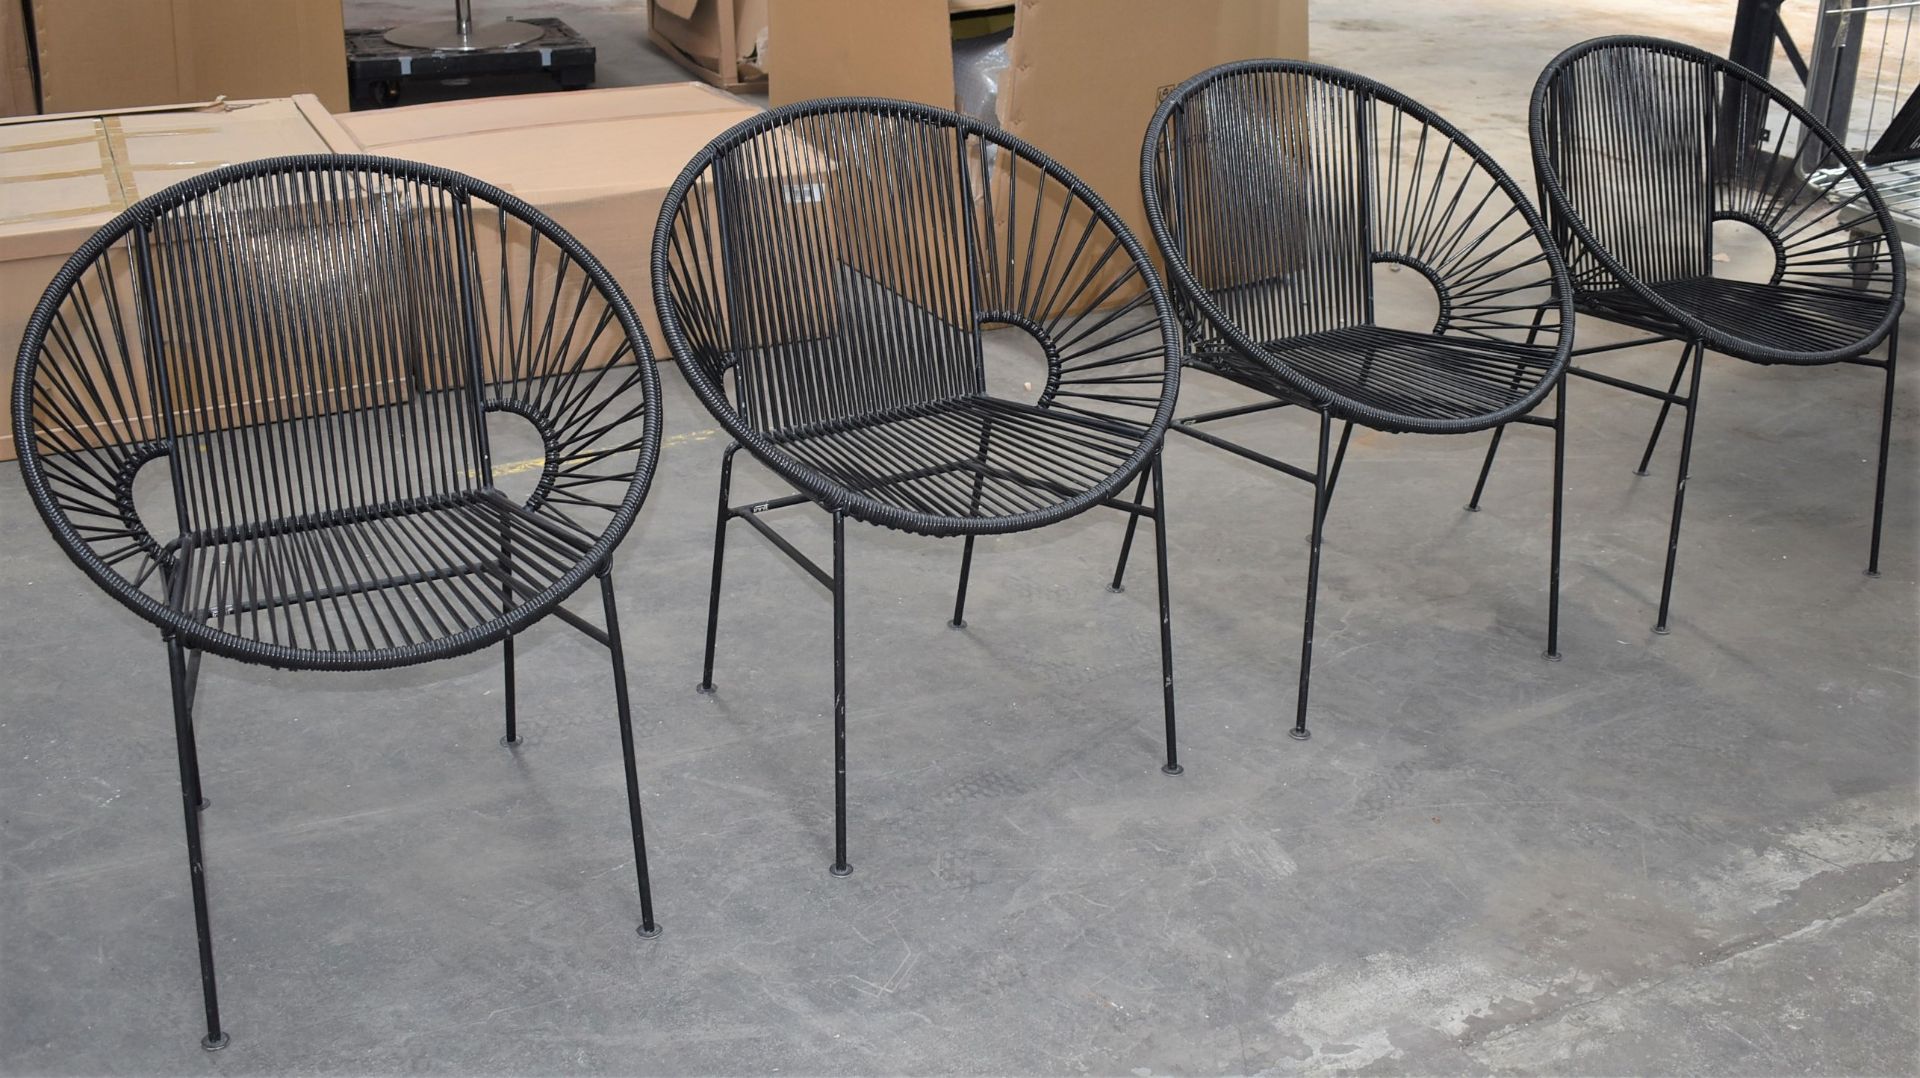 4 x Innit Designer Chairs - Acapulco Style Chairs in Black Suitable For Indoor or Outdoor Use -